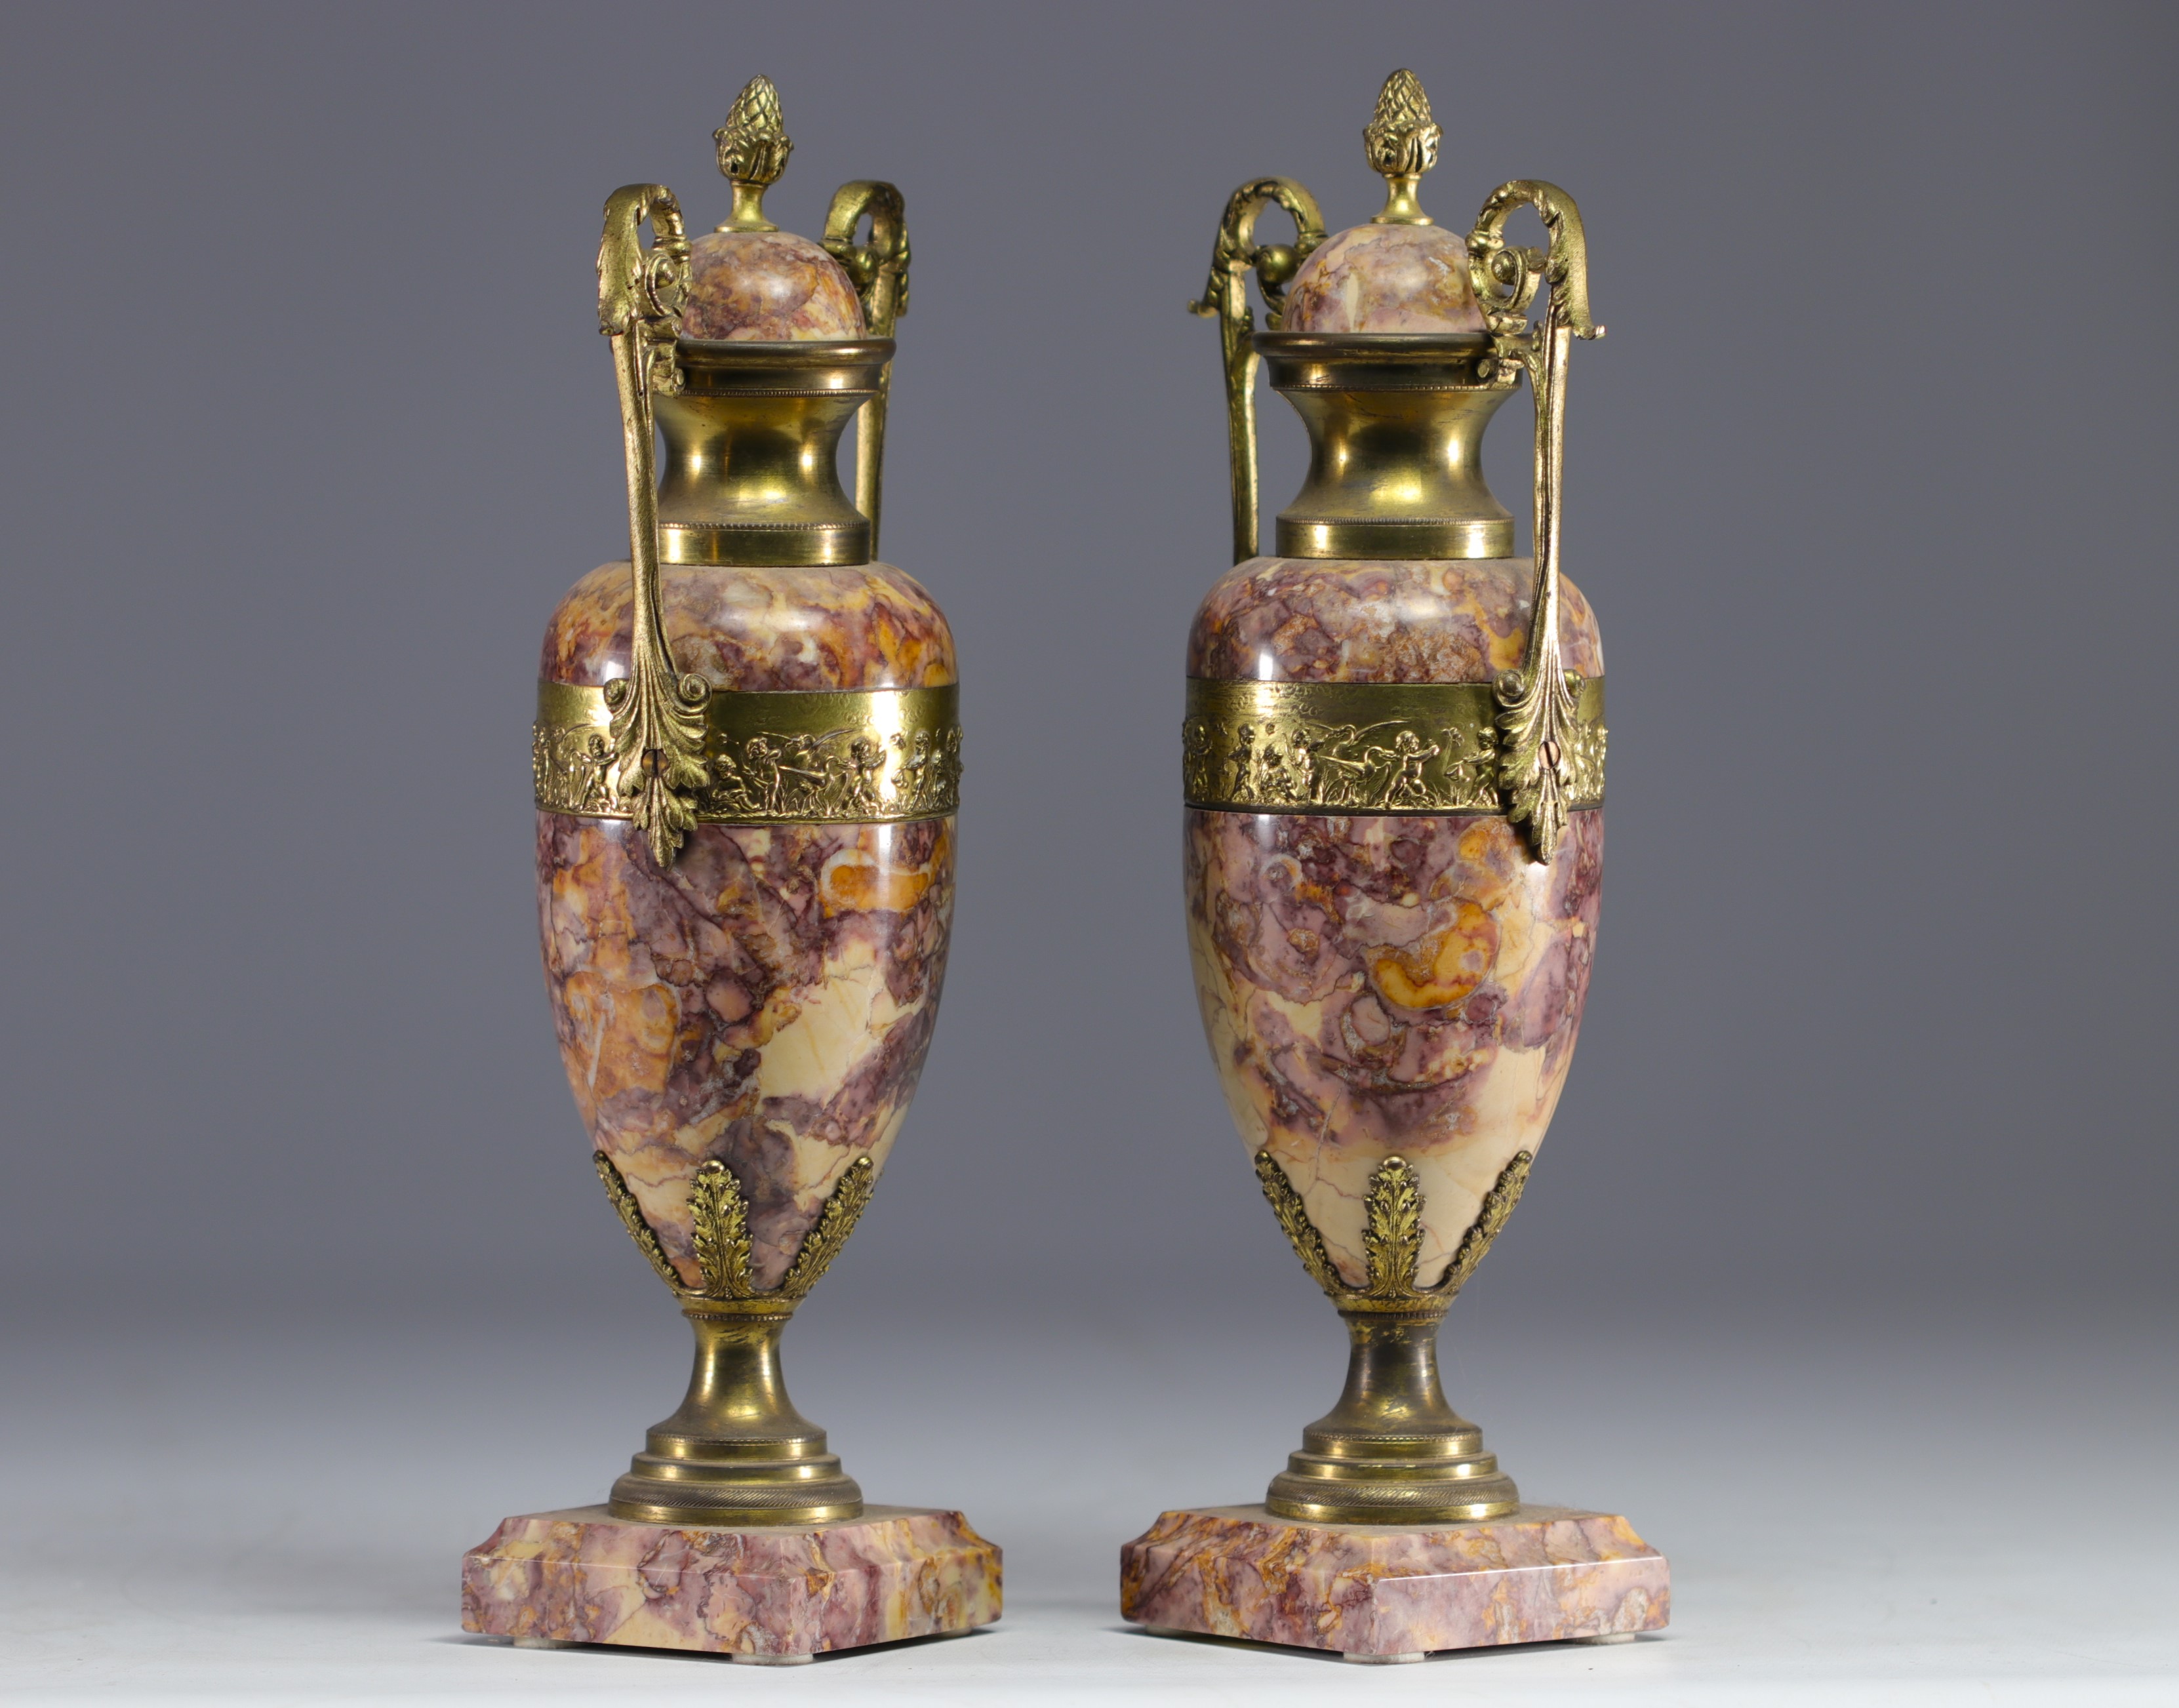 Pair of marble and gilt bronze "Frise aux Putti" cassolettes, 19th century. - Image 2 of 3